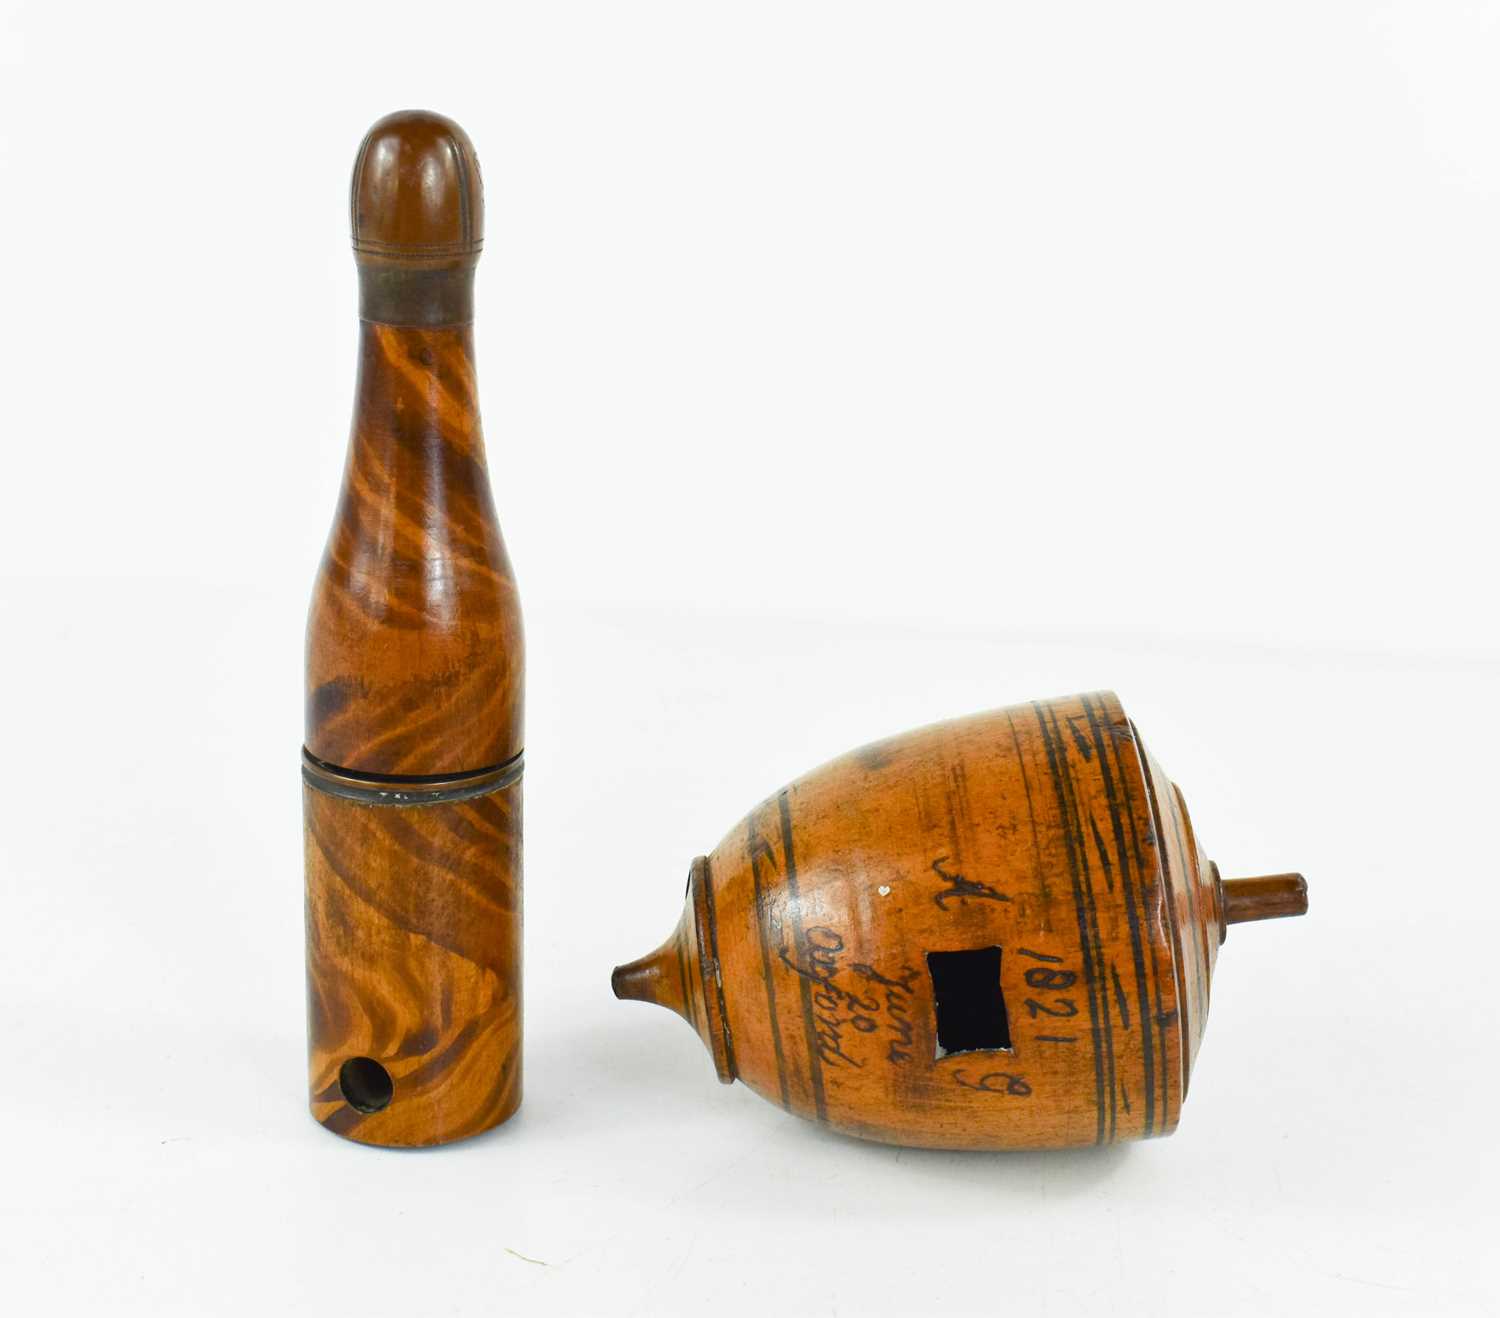 A 19th century olive wood egg etui, hand painted with decorative borders, and 1821, A G, June 20,